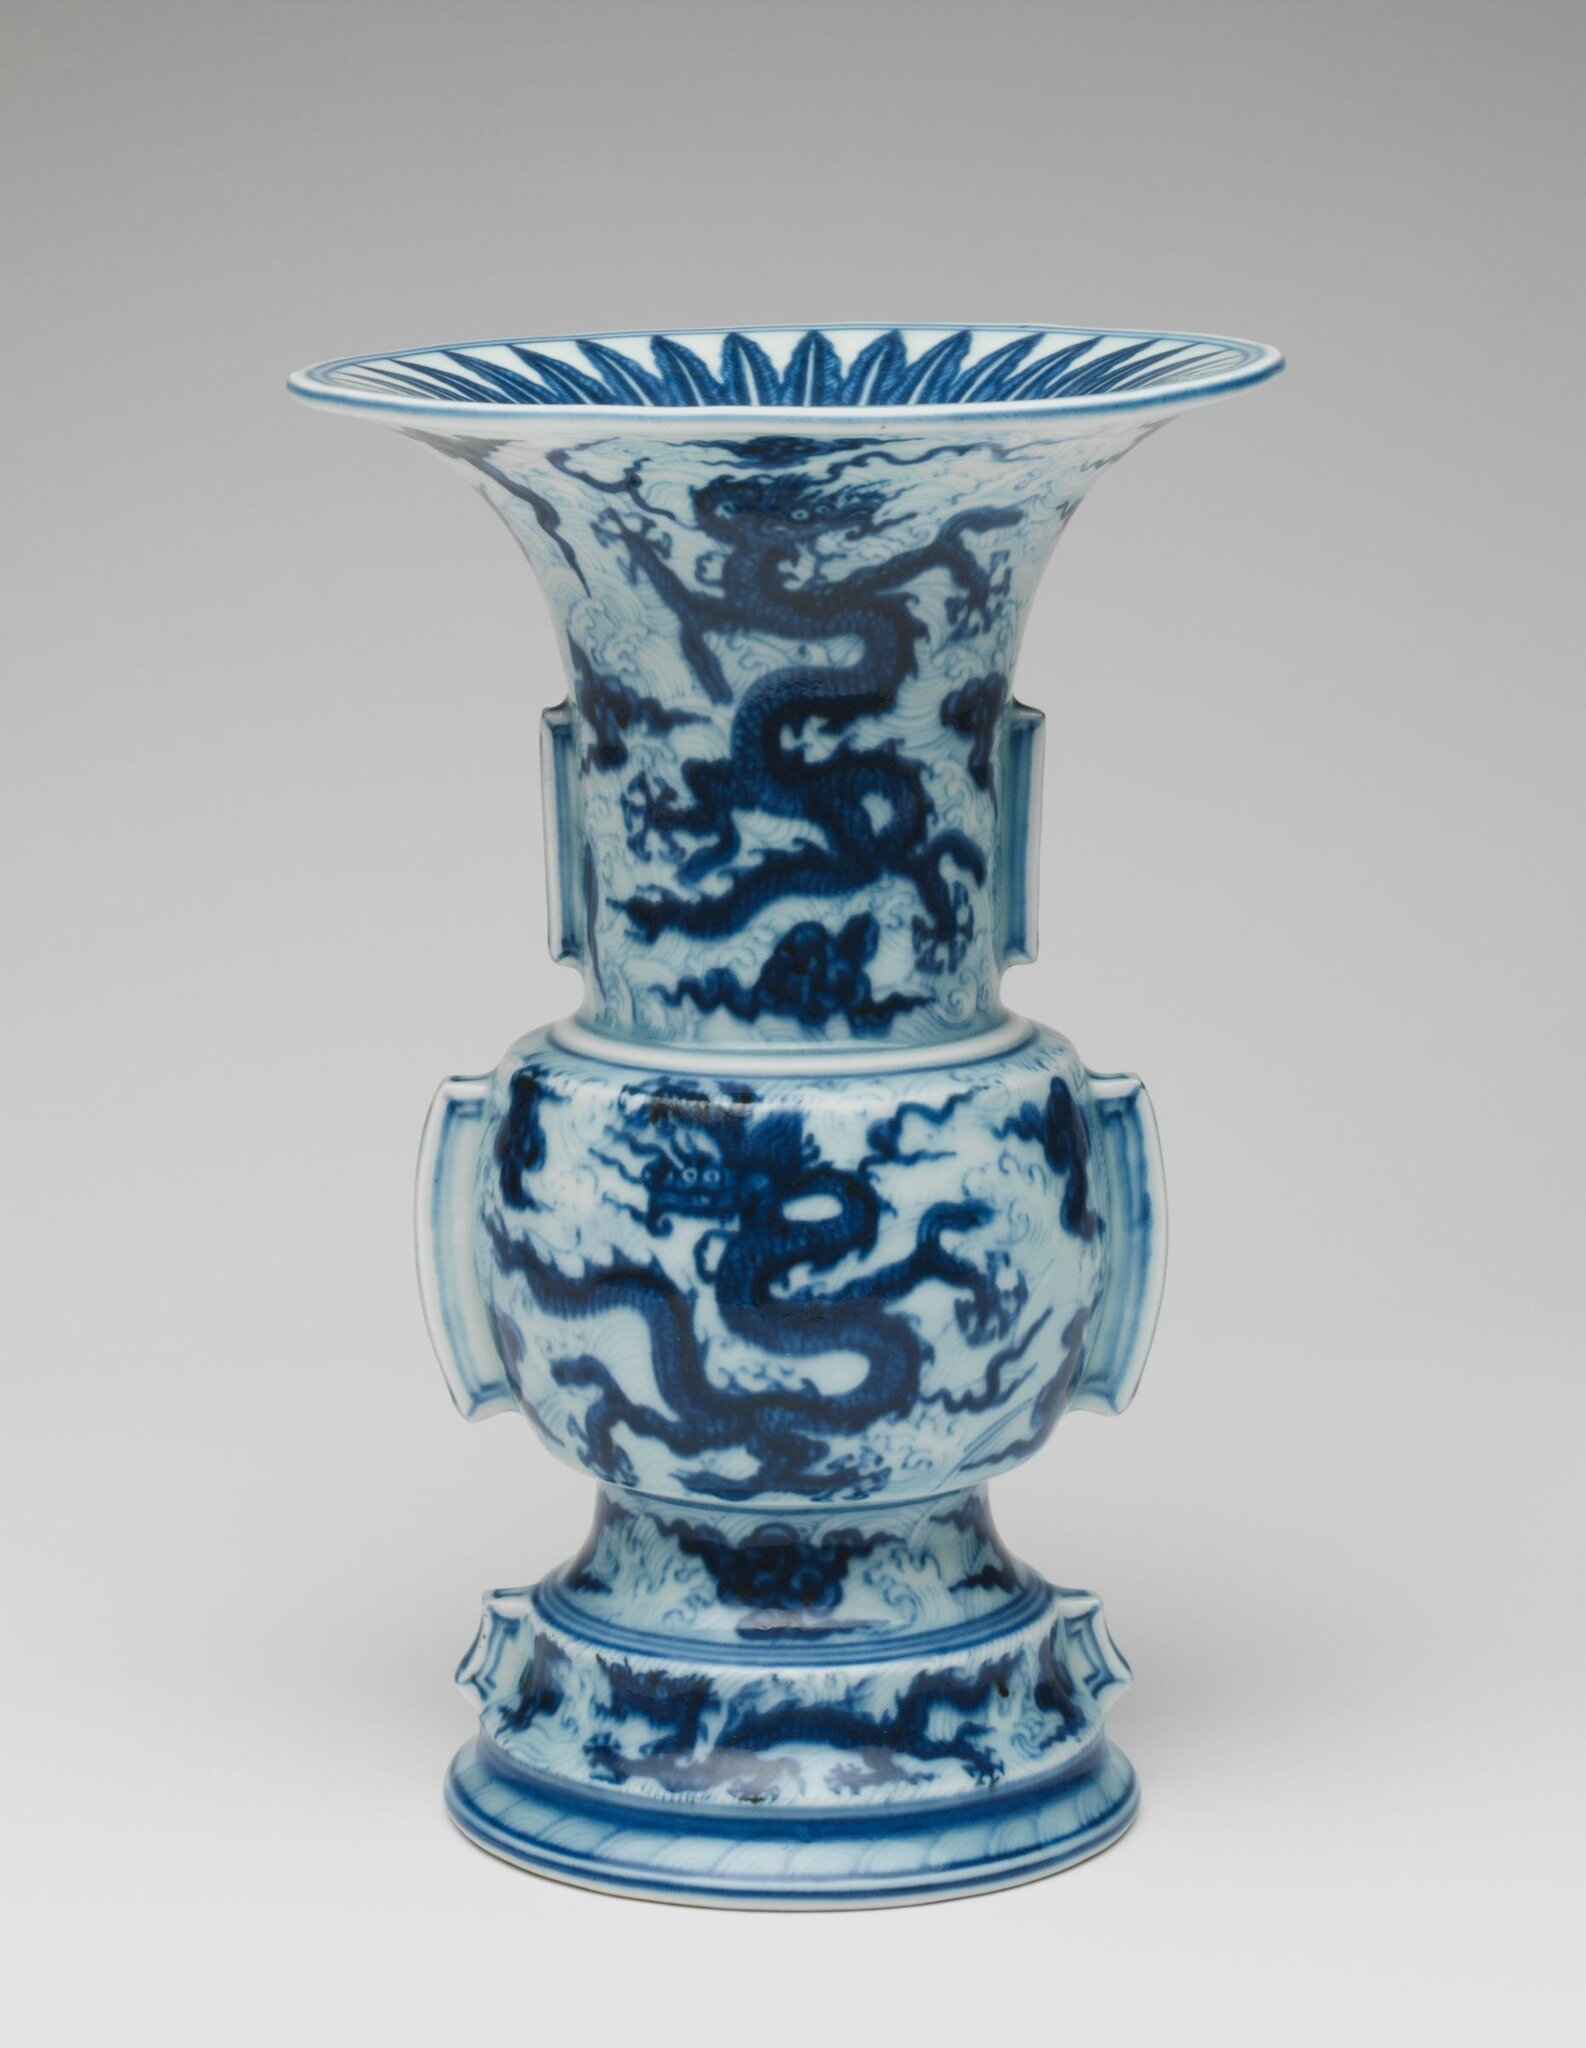 Flower Vase in the Form of an Archaic Bronze 'Zun' Wine Beaker with Dragon-and-Wave Decor, perhaps Chenghua period (1465-1487), Ming dynasty, 1368-1644